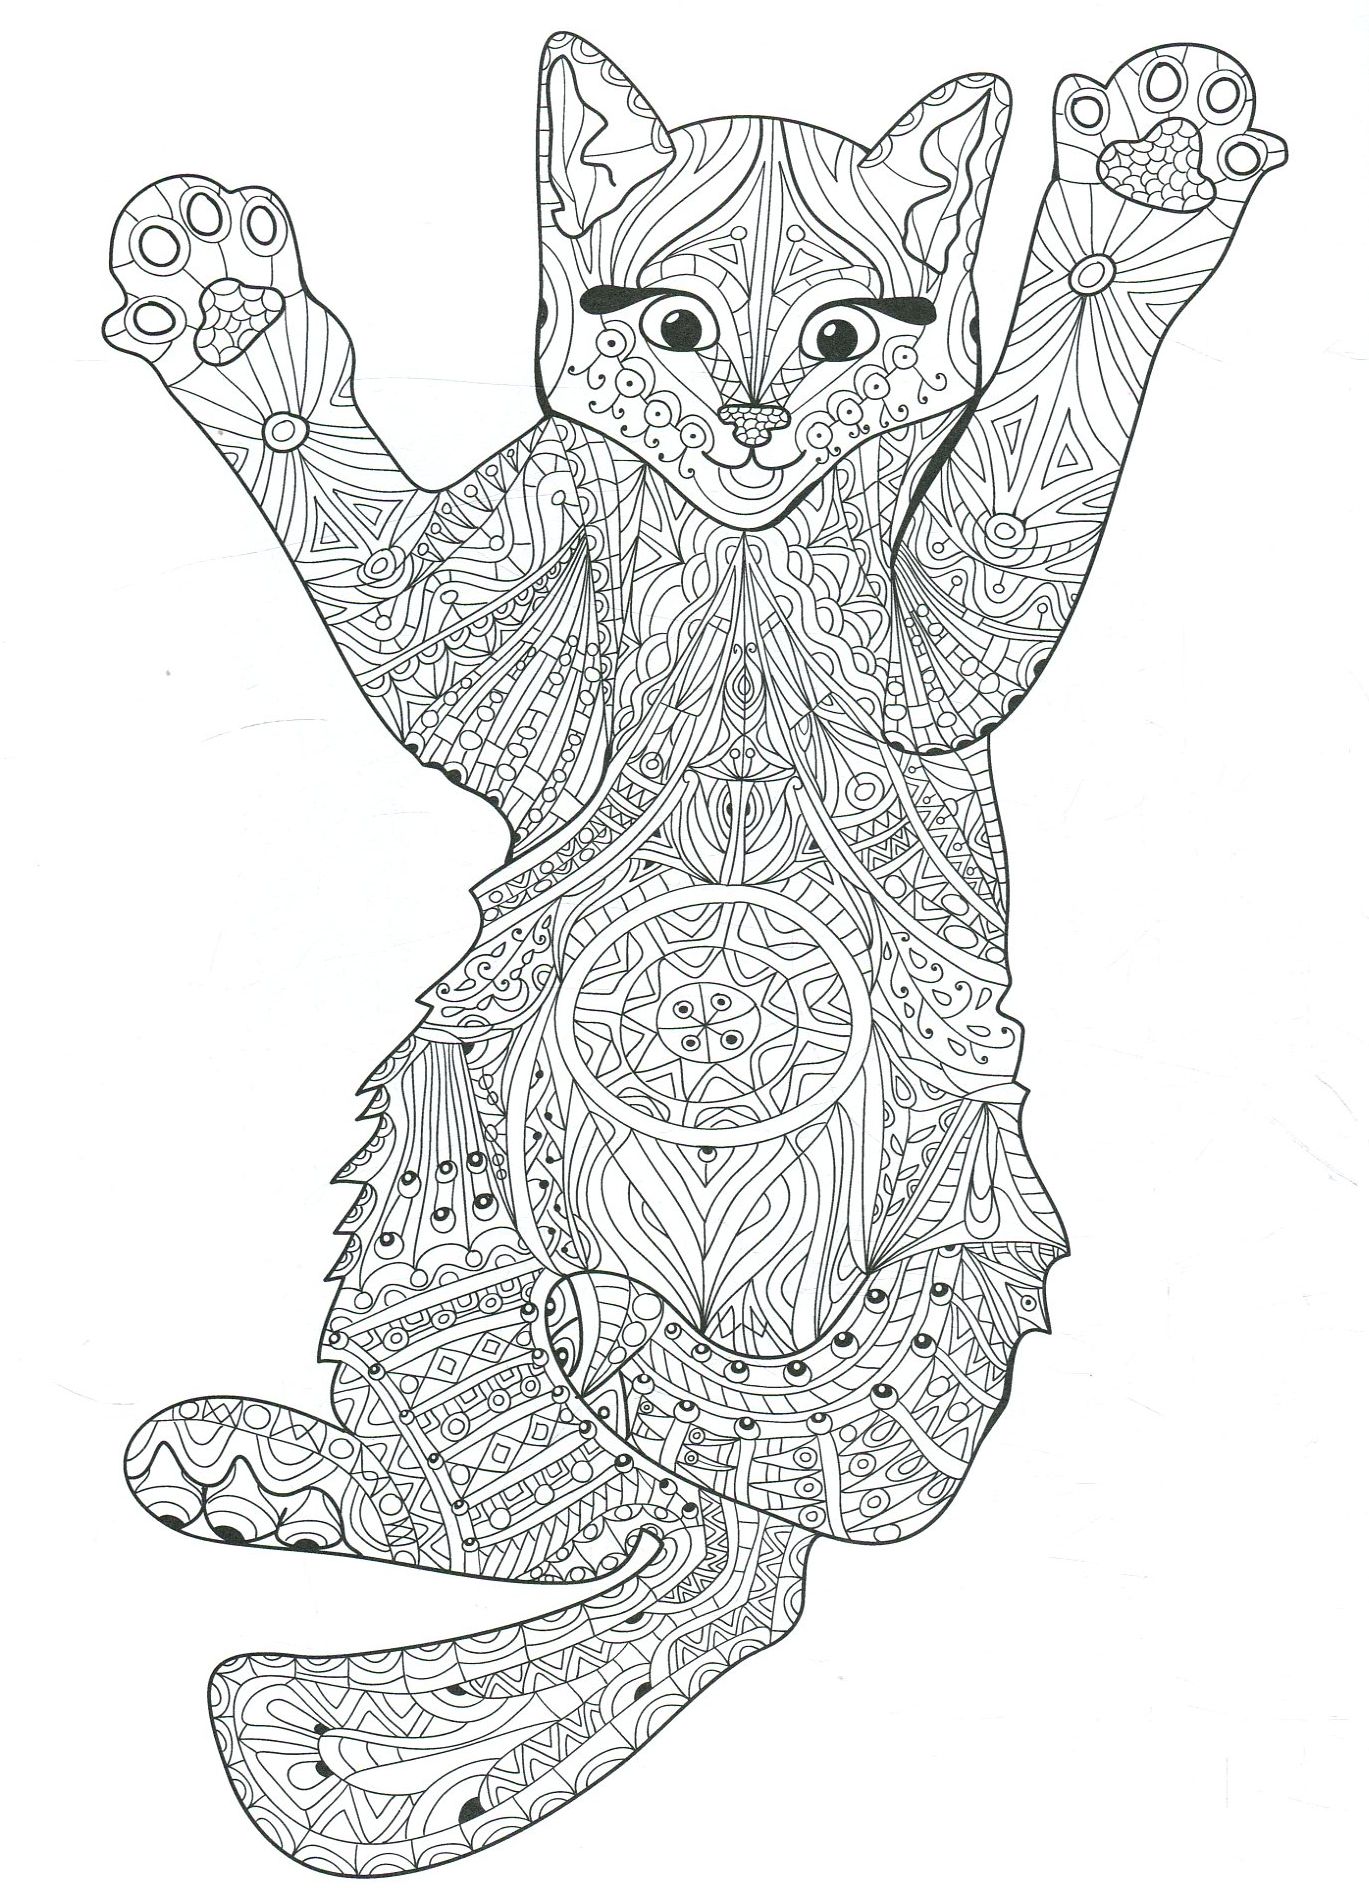 Antistress cat Coloring Pages to download and print for free